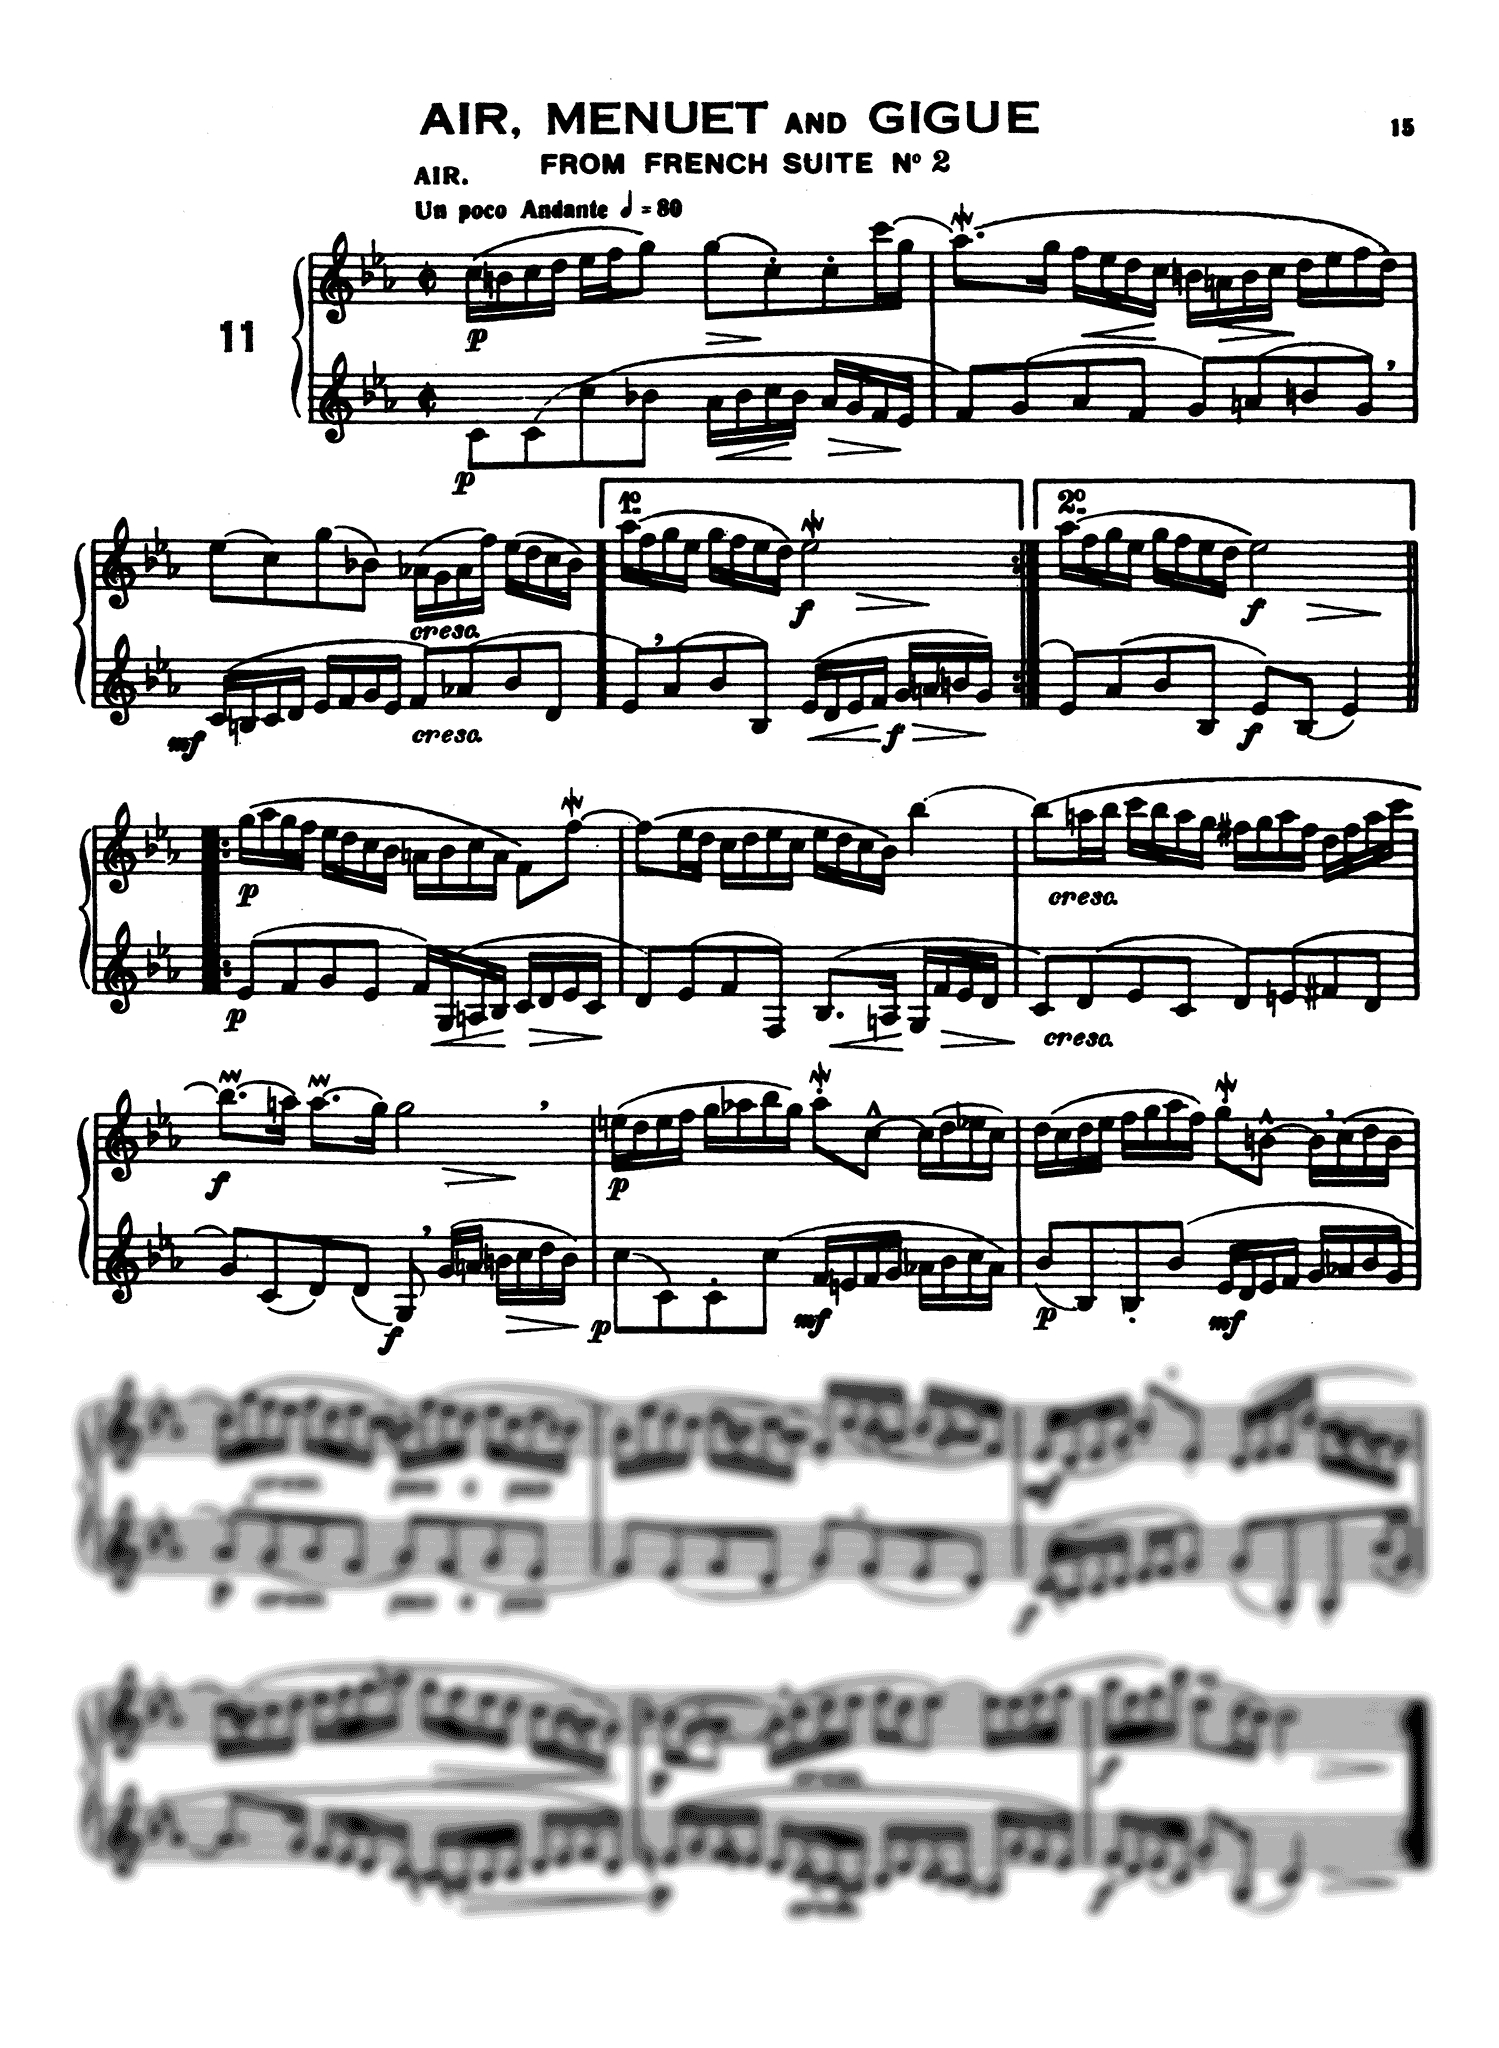 J. S. Bach Clarinet Duos, arranged by Langenus French Suite No. 2